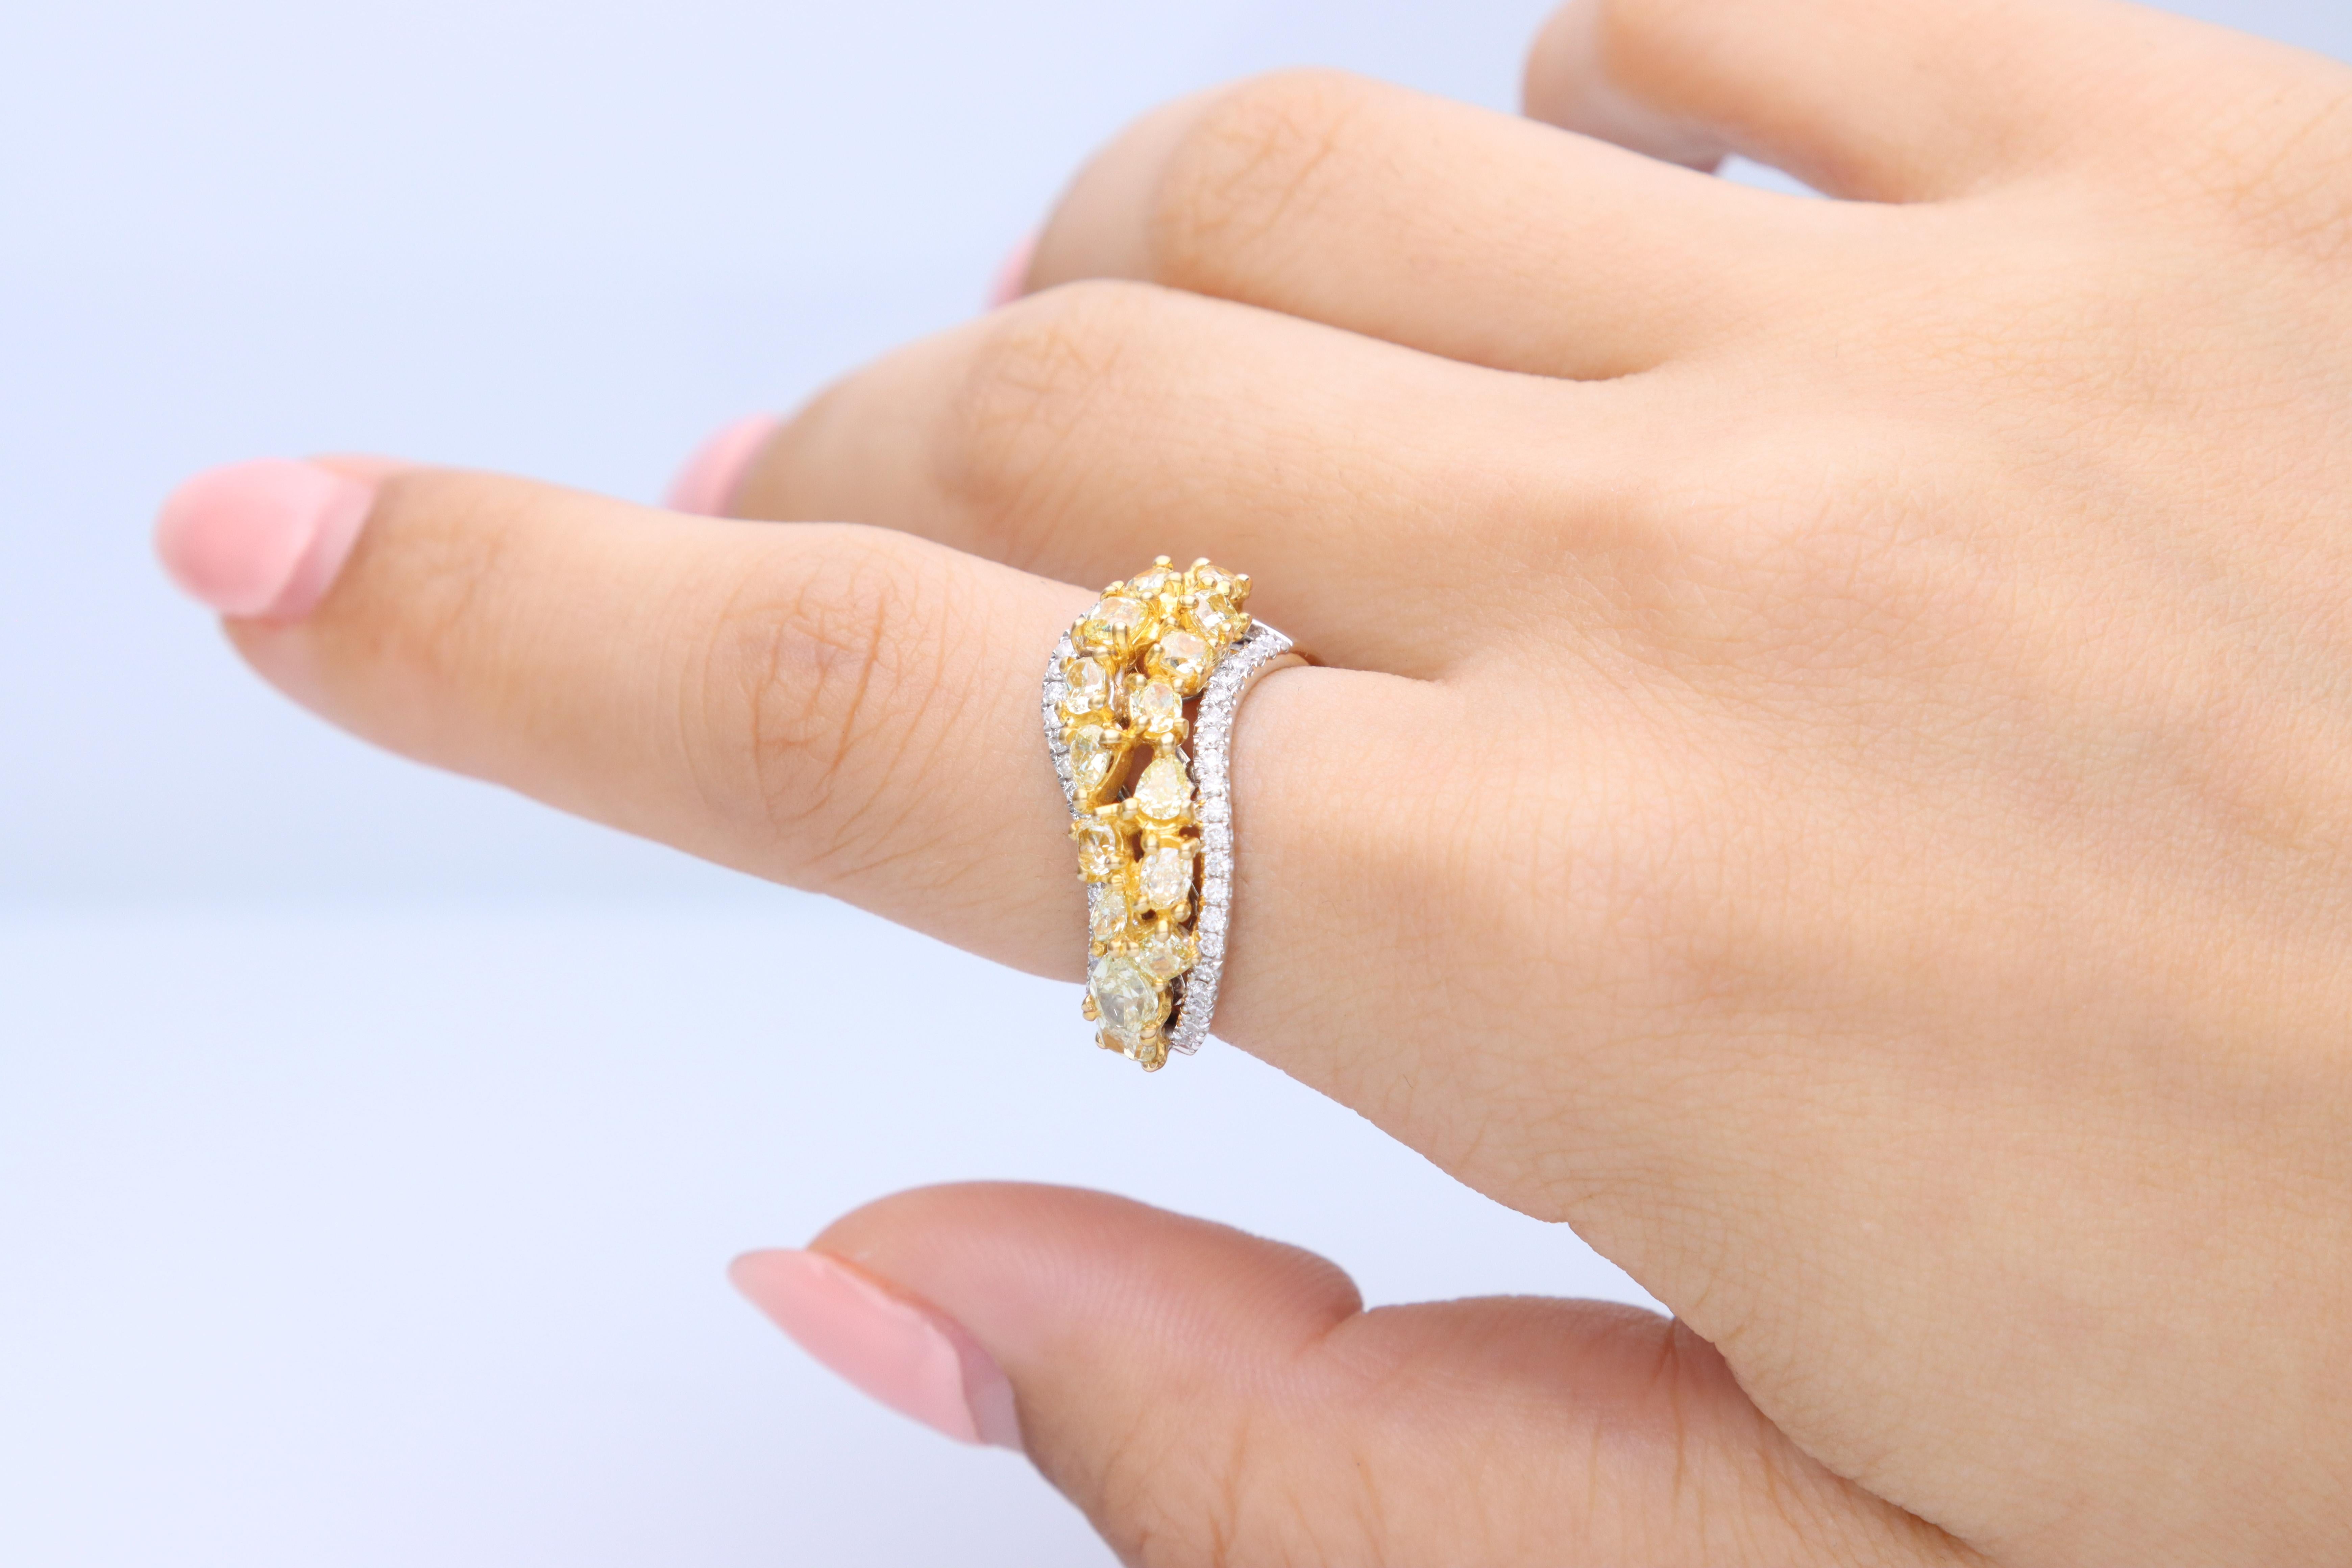 Stunning, timeless and classy eternity Unique Ring. Decorate yourself in luxury with this Gin & Grace Ring. The 18K Two Tone Gold jewelry boasts with 15 pcs 1.72 carat Yellow Diamond and Natural Round-cut white Diamond (45 Pcs) 0.33 Carat accent